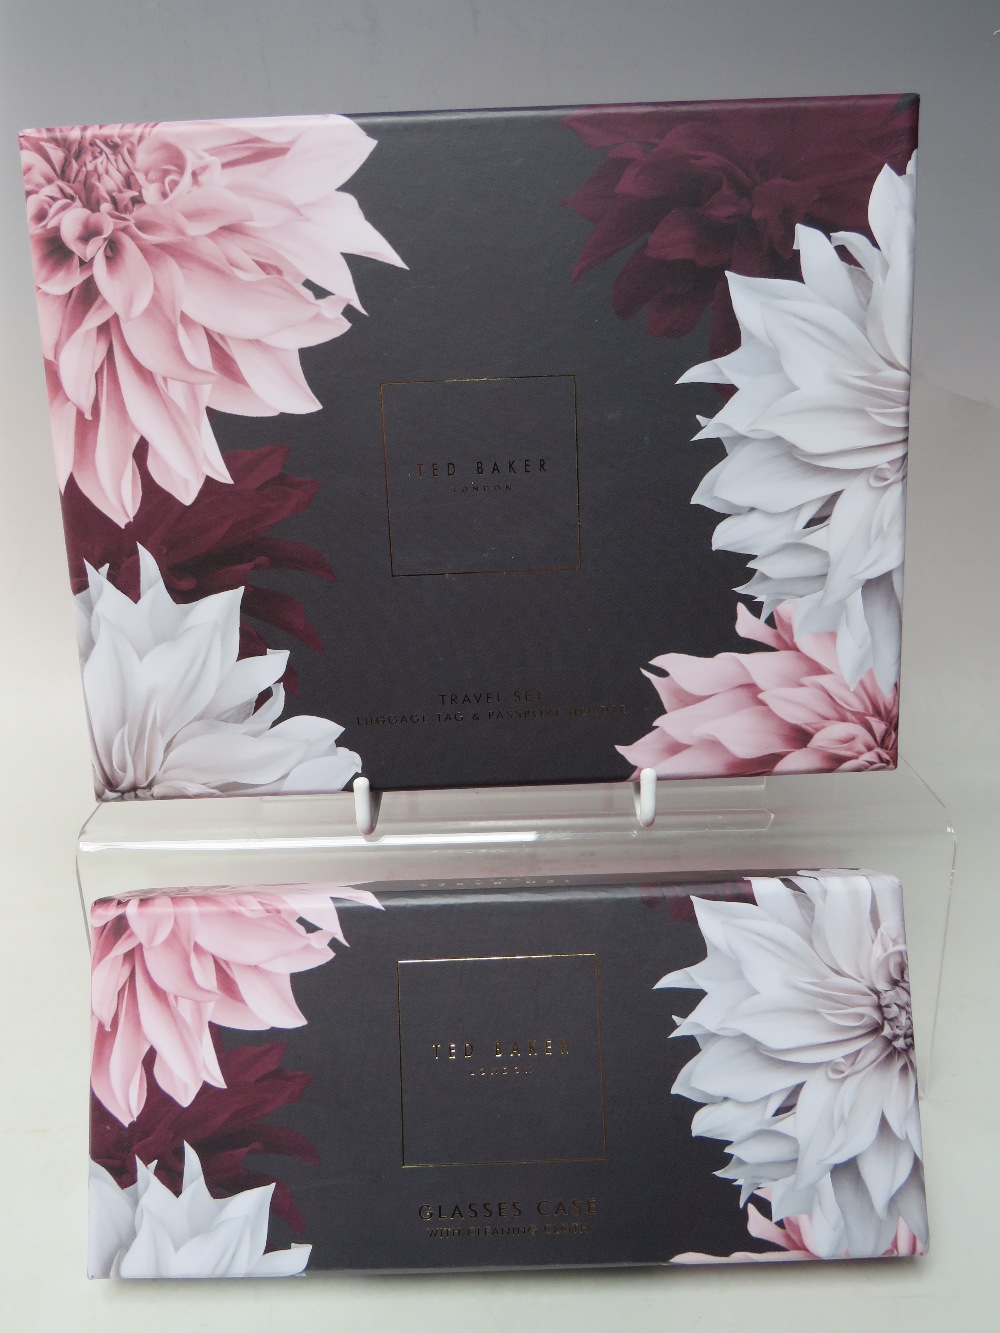 A NEW AND BOXED TED BAKER TRAVEL SET, comprising a luggage tag and passport holder, together with - Image 4 of 5